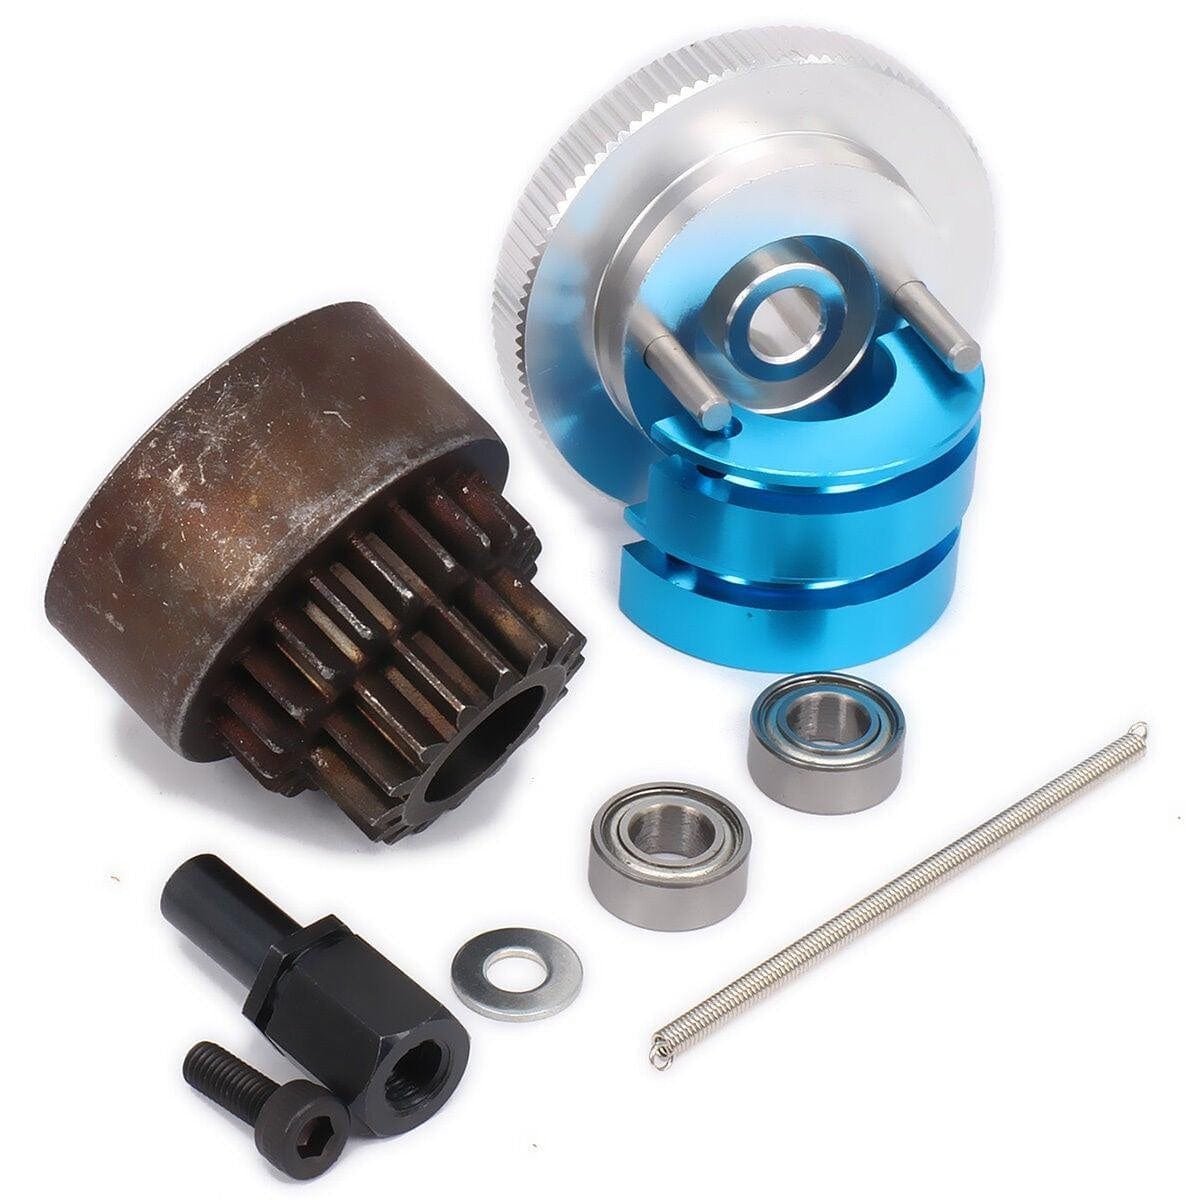 RCAWD UNIVERSAL RC UPGRADE PARTS RCAWD 16T-21T Two Speed Clutch Set Bell Shoes Springs Flywheel Bearing for 1/10 RC Car